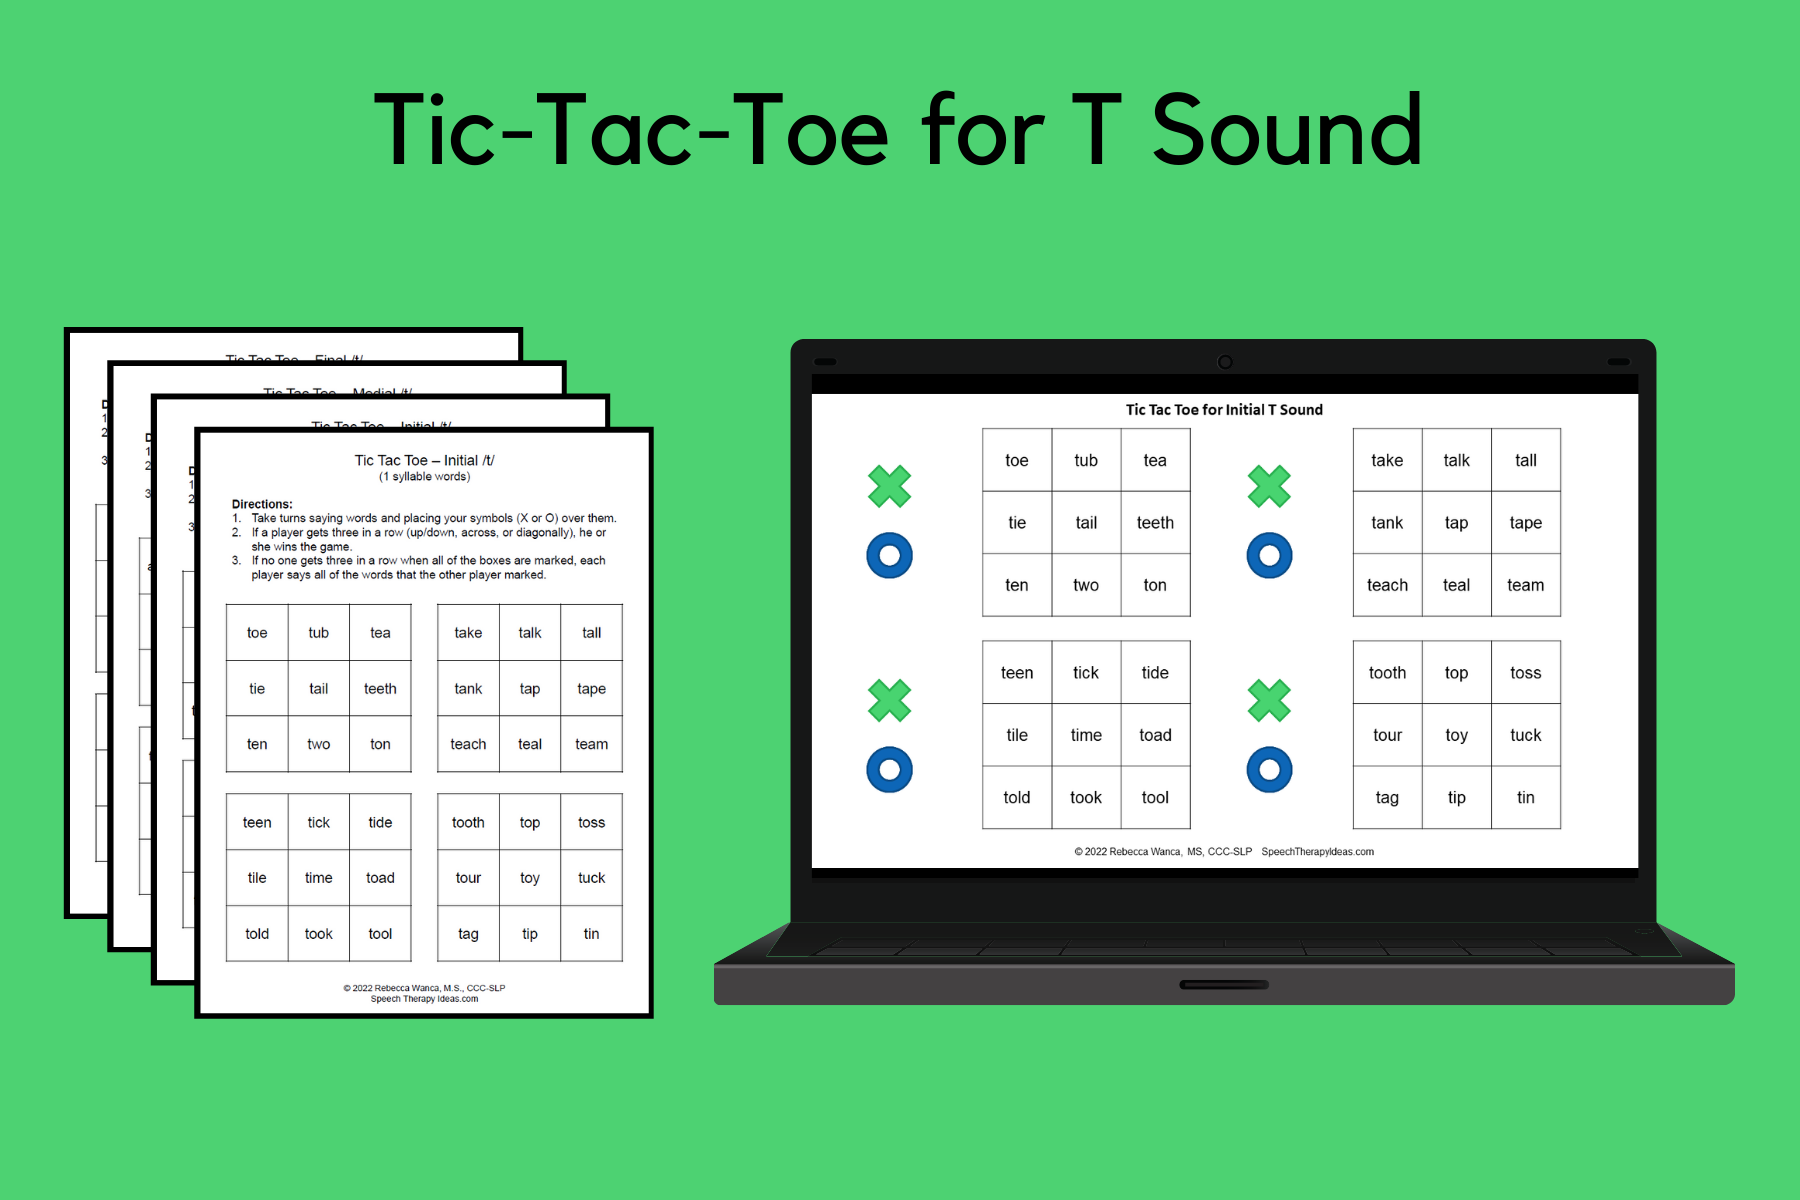 Tic-Tac-Toe Games for T Sound